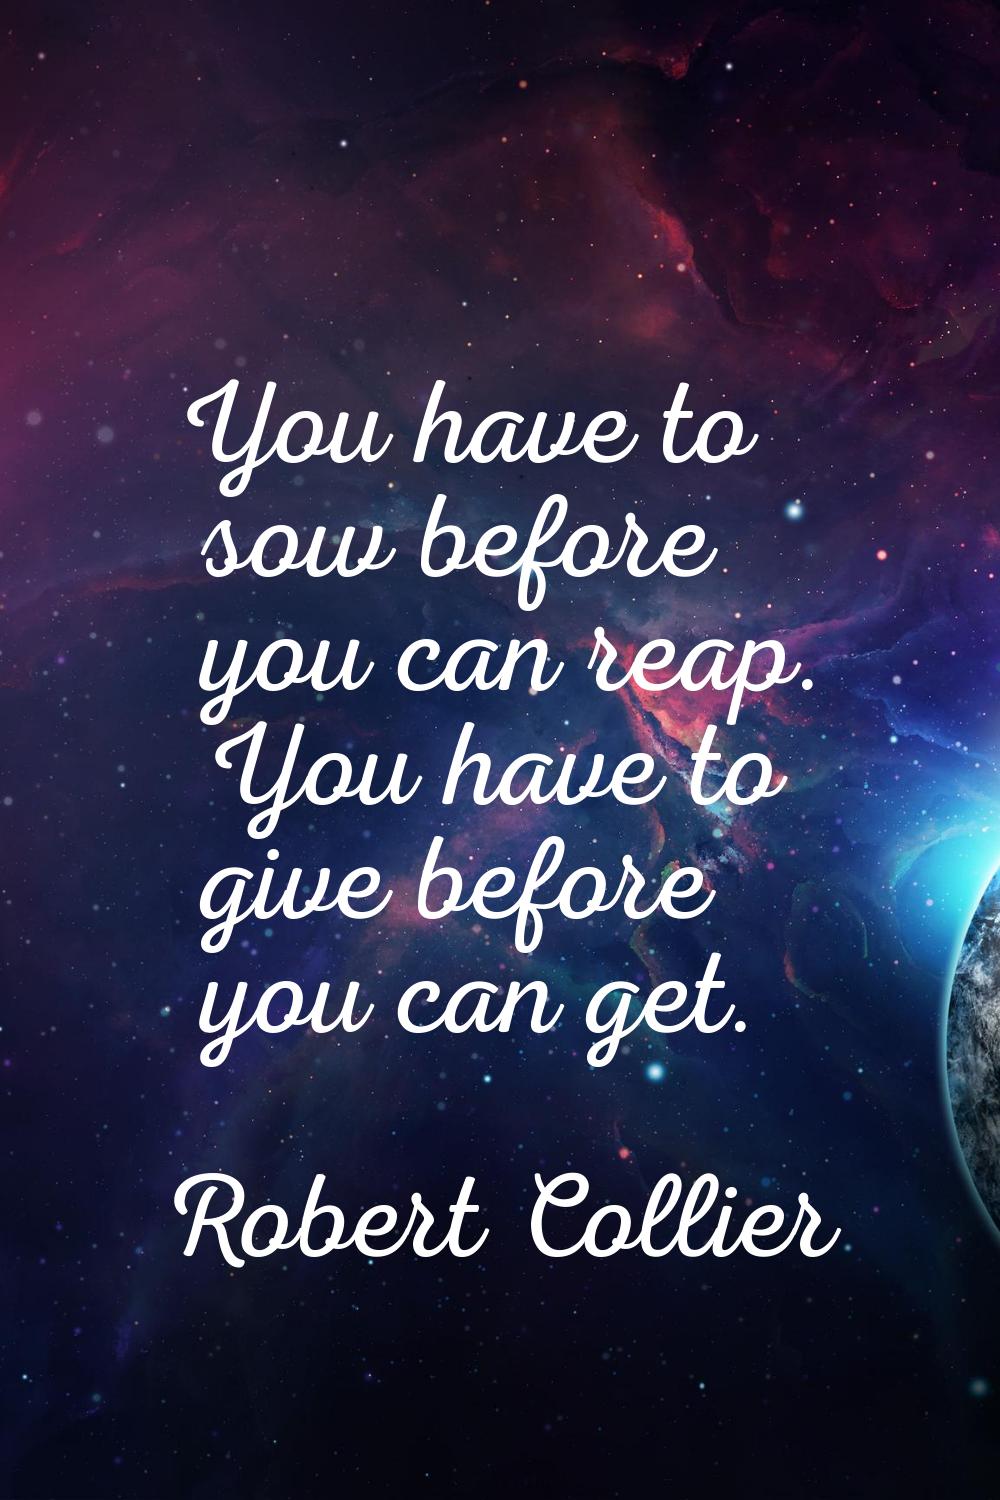 You have to sow before you can reap. You have to give before you can get.